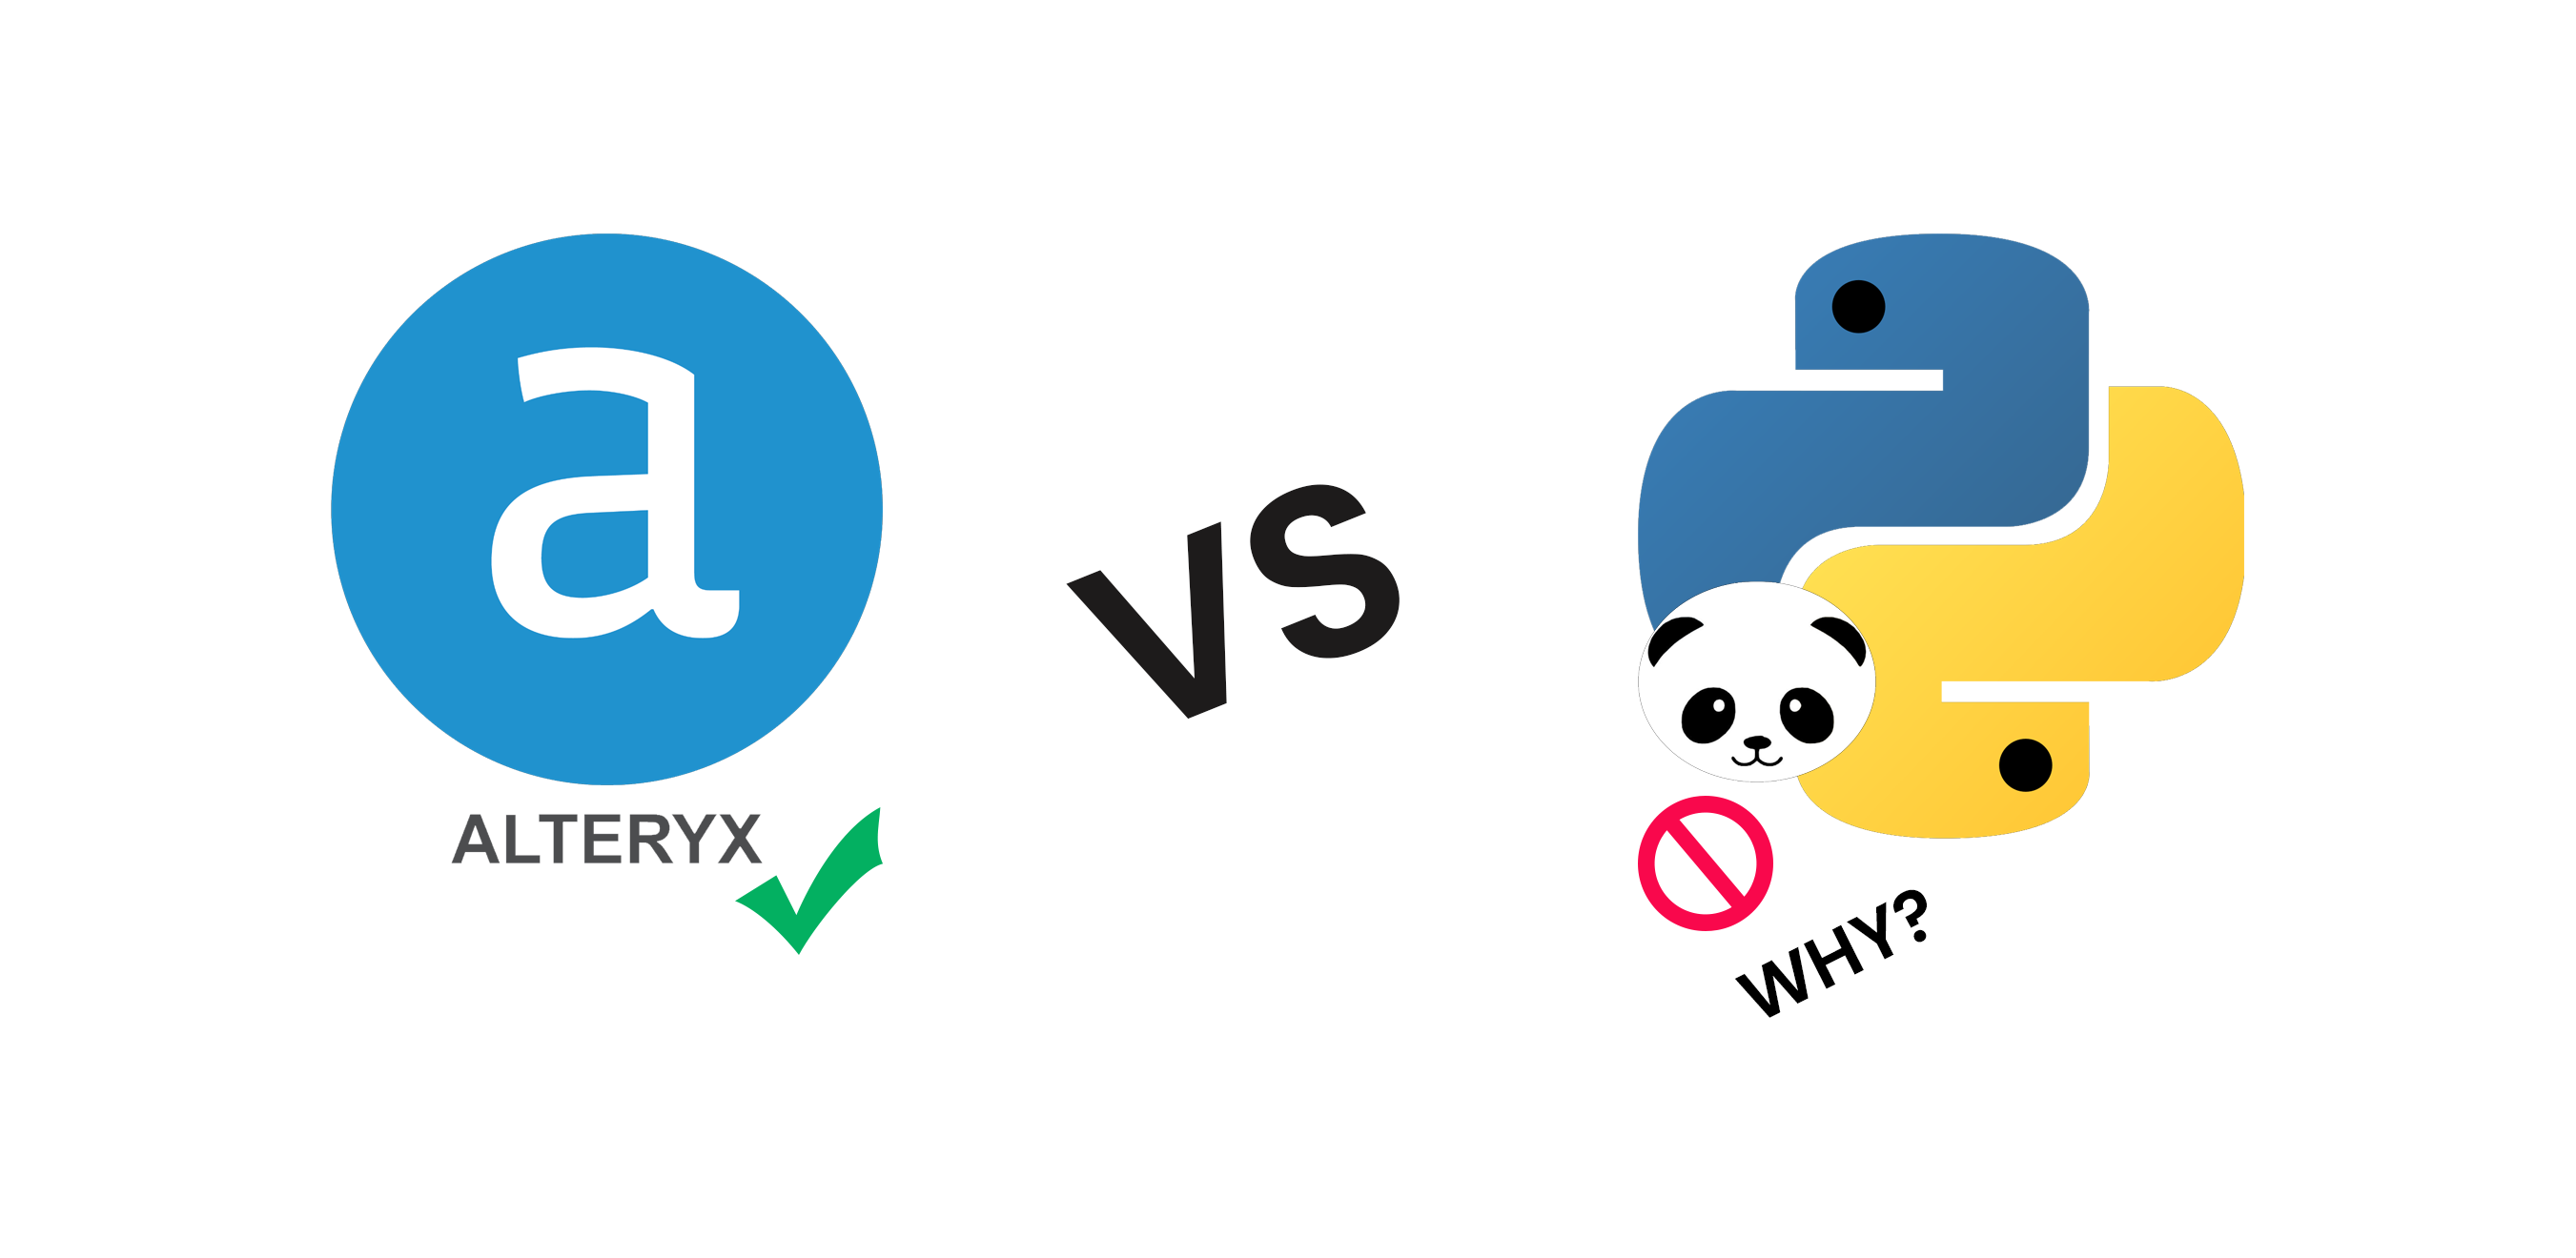 DIFFERENCE BETWEEN ALTERYX VS PYTHON